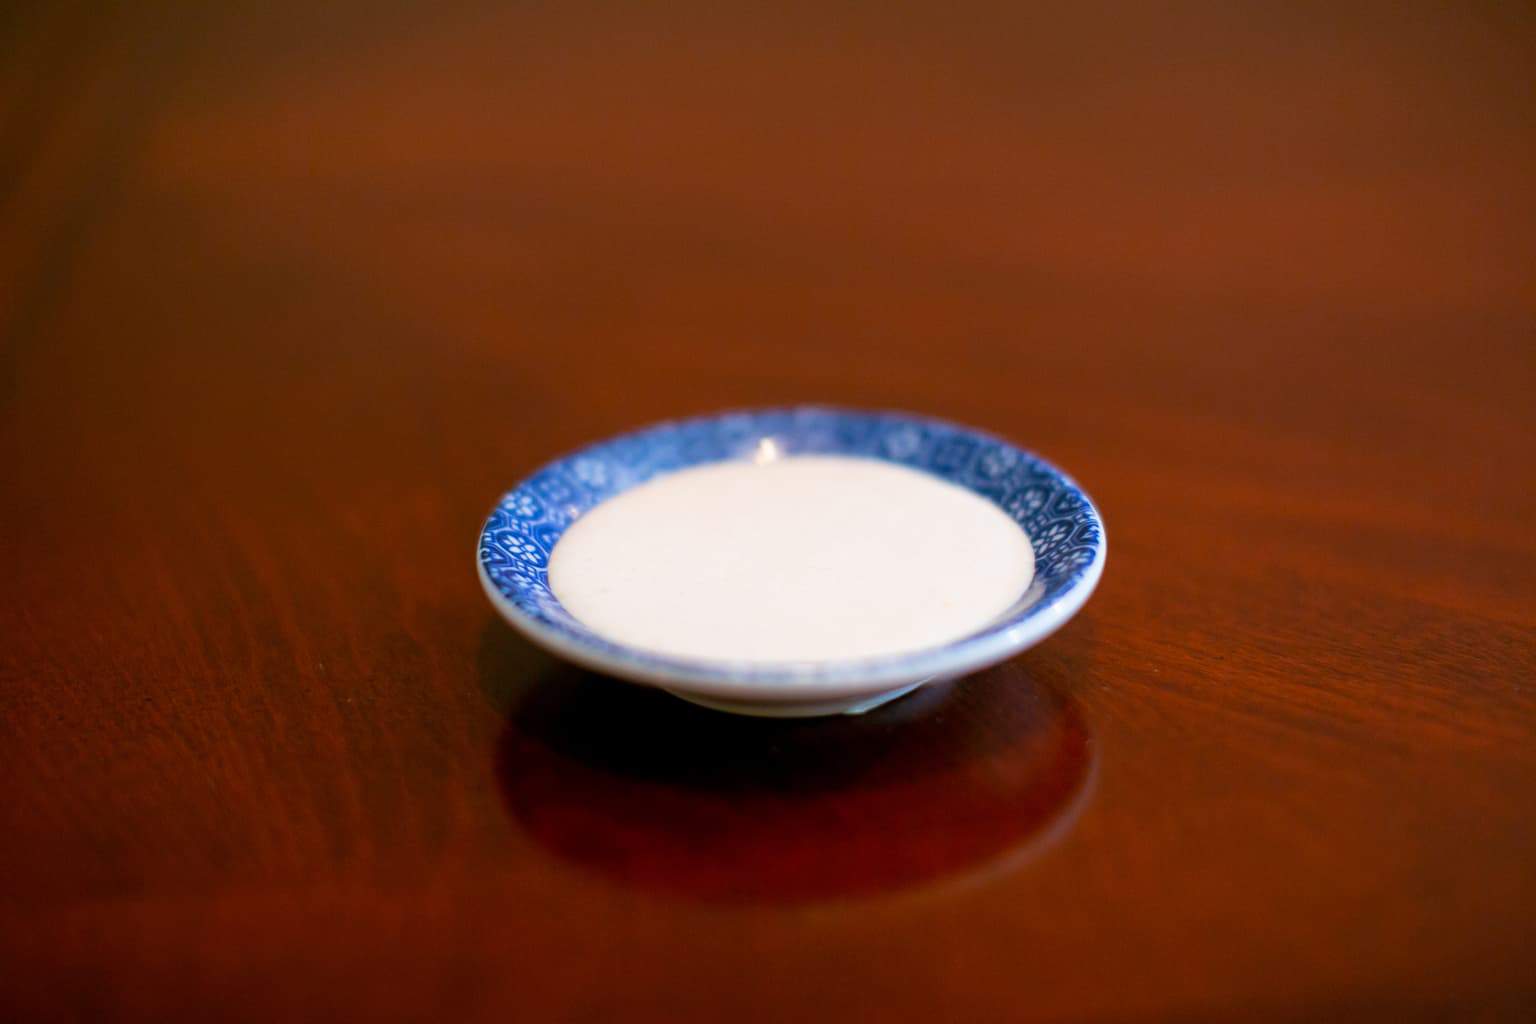 Japanese white sauce served in a saucer